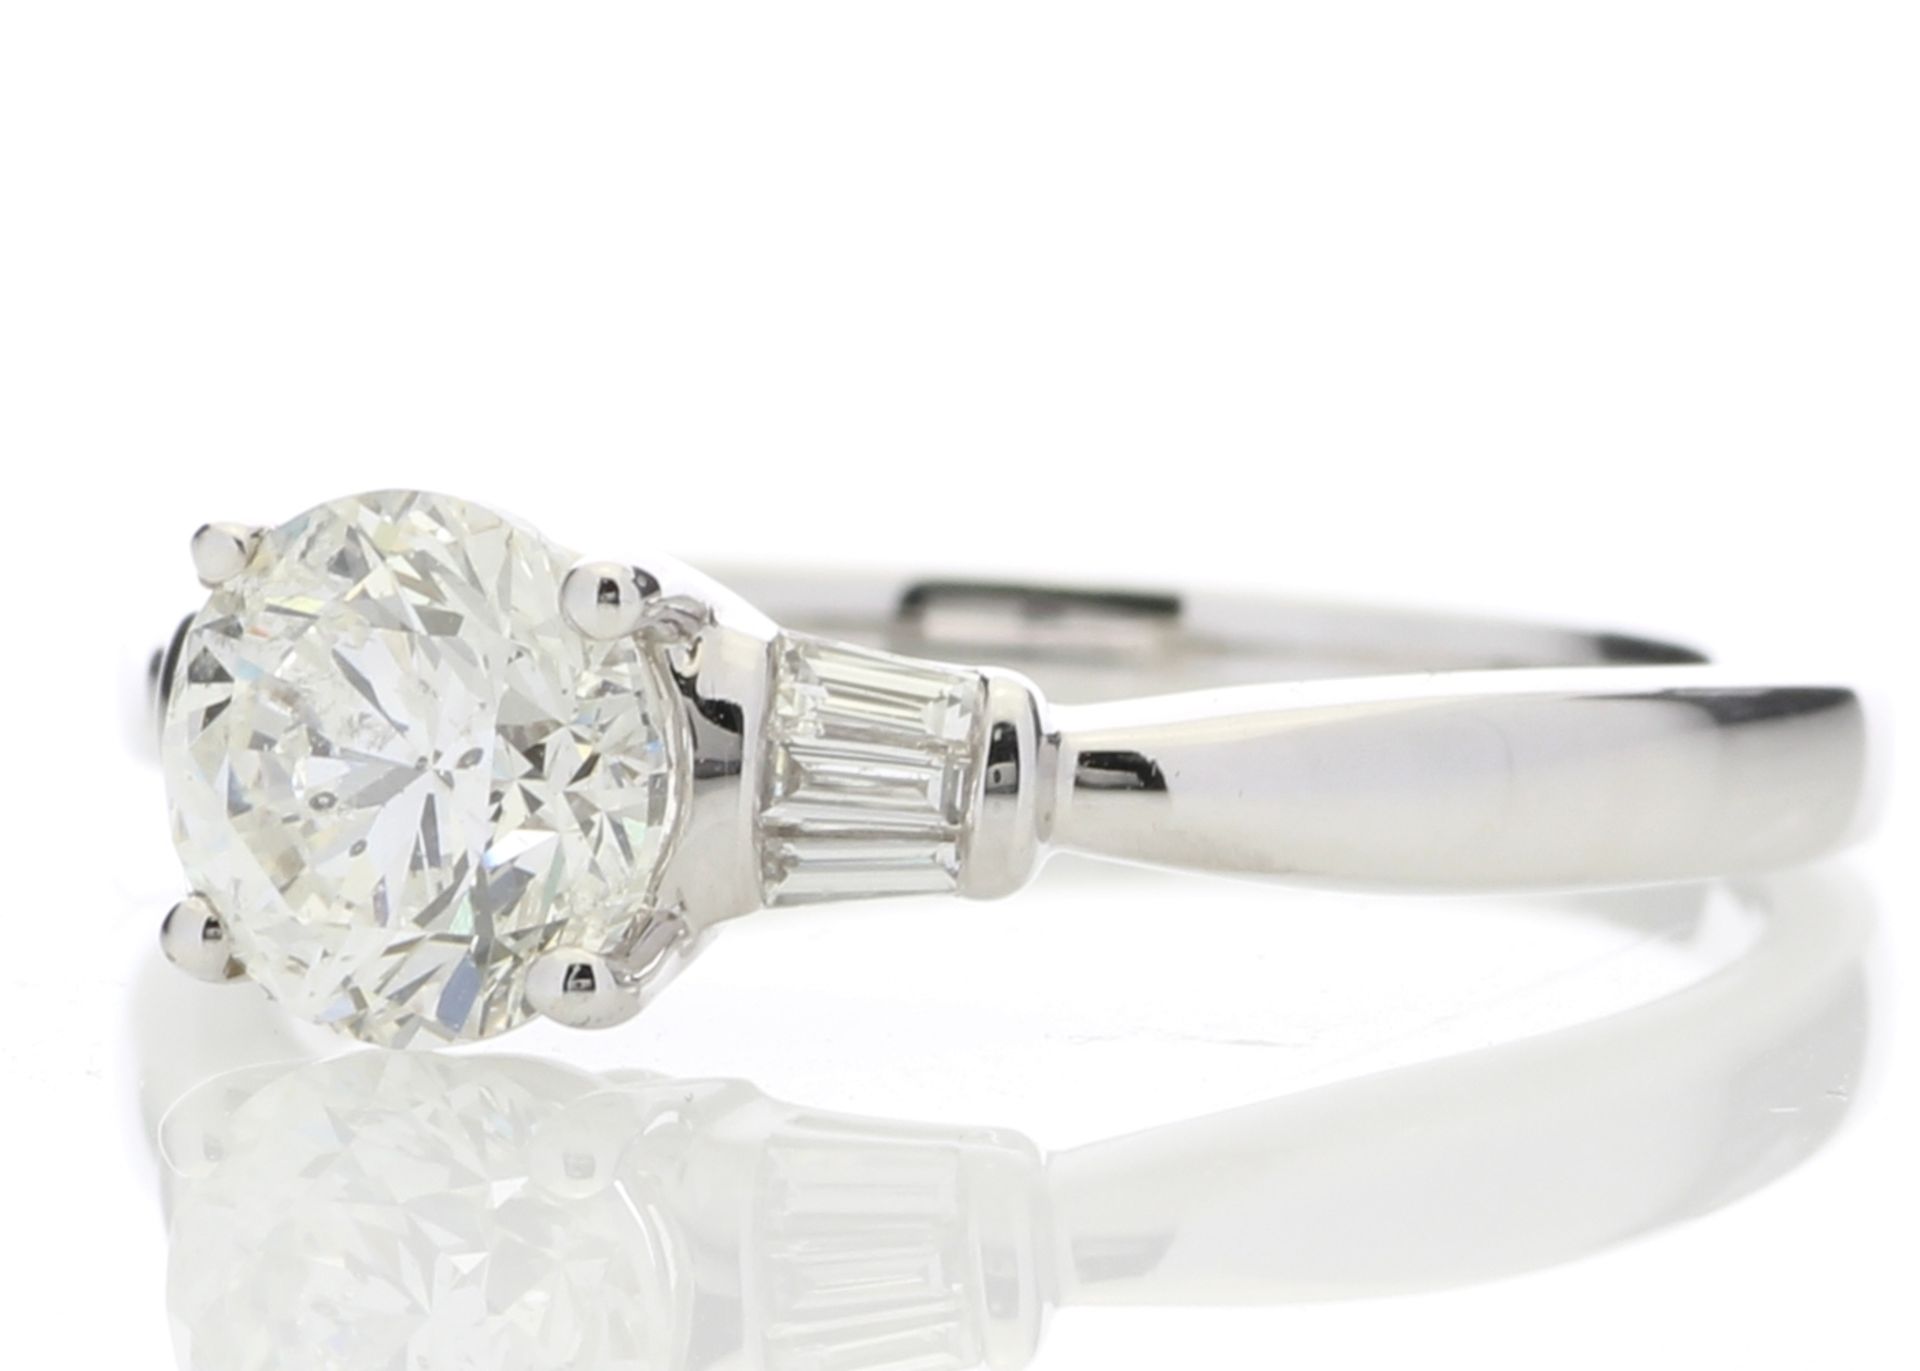 18ct White Gold Diamond Ring With Baguette 1.15 Carats - Valued By GIE £37,300.00 - A beautiful - Image 2 of 5